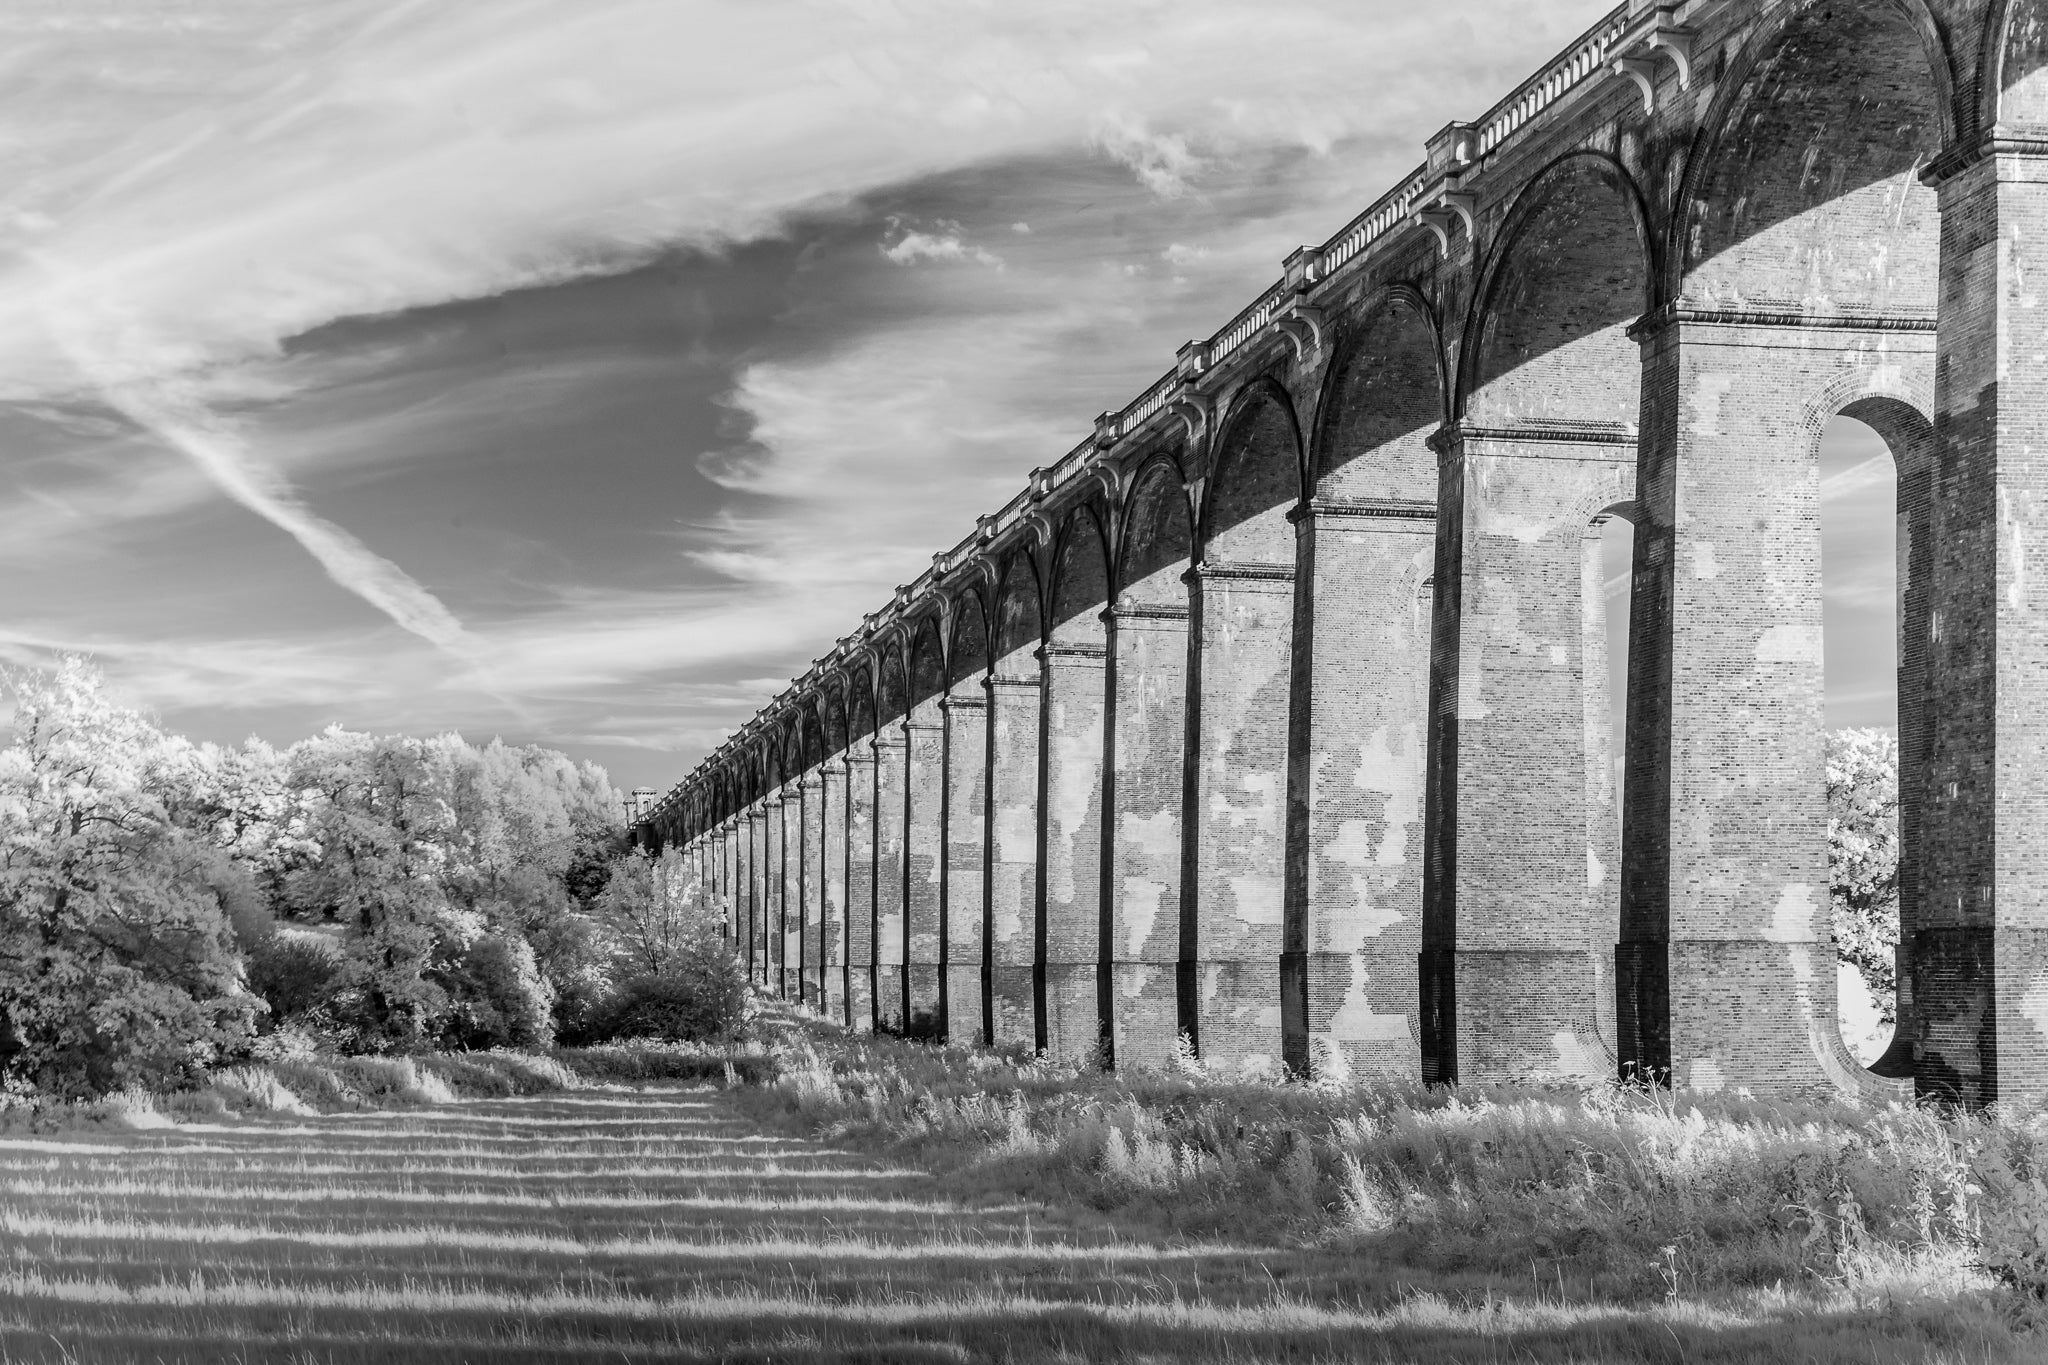 The Ouse Valley Viaduct